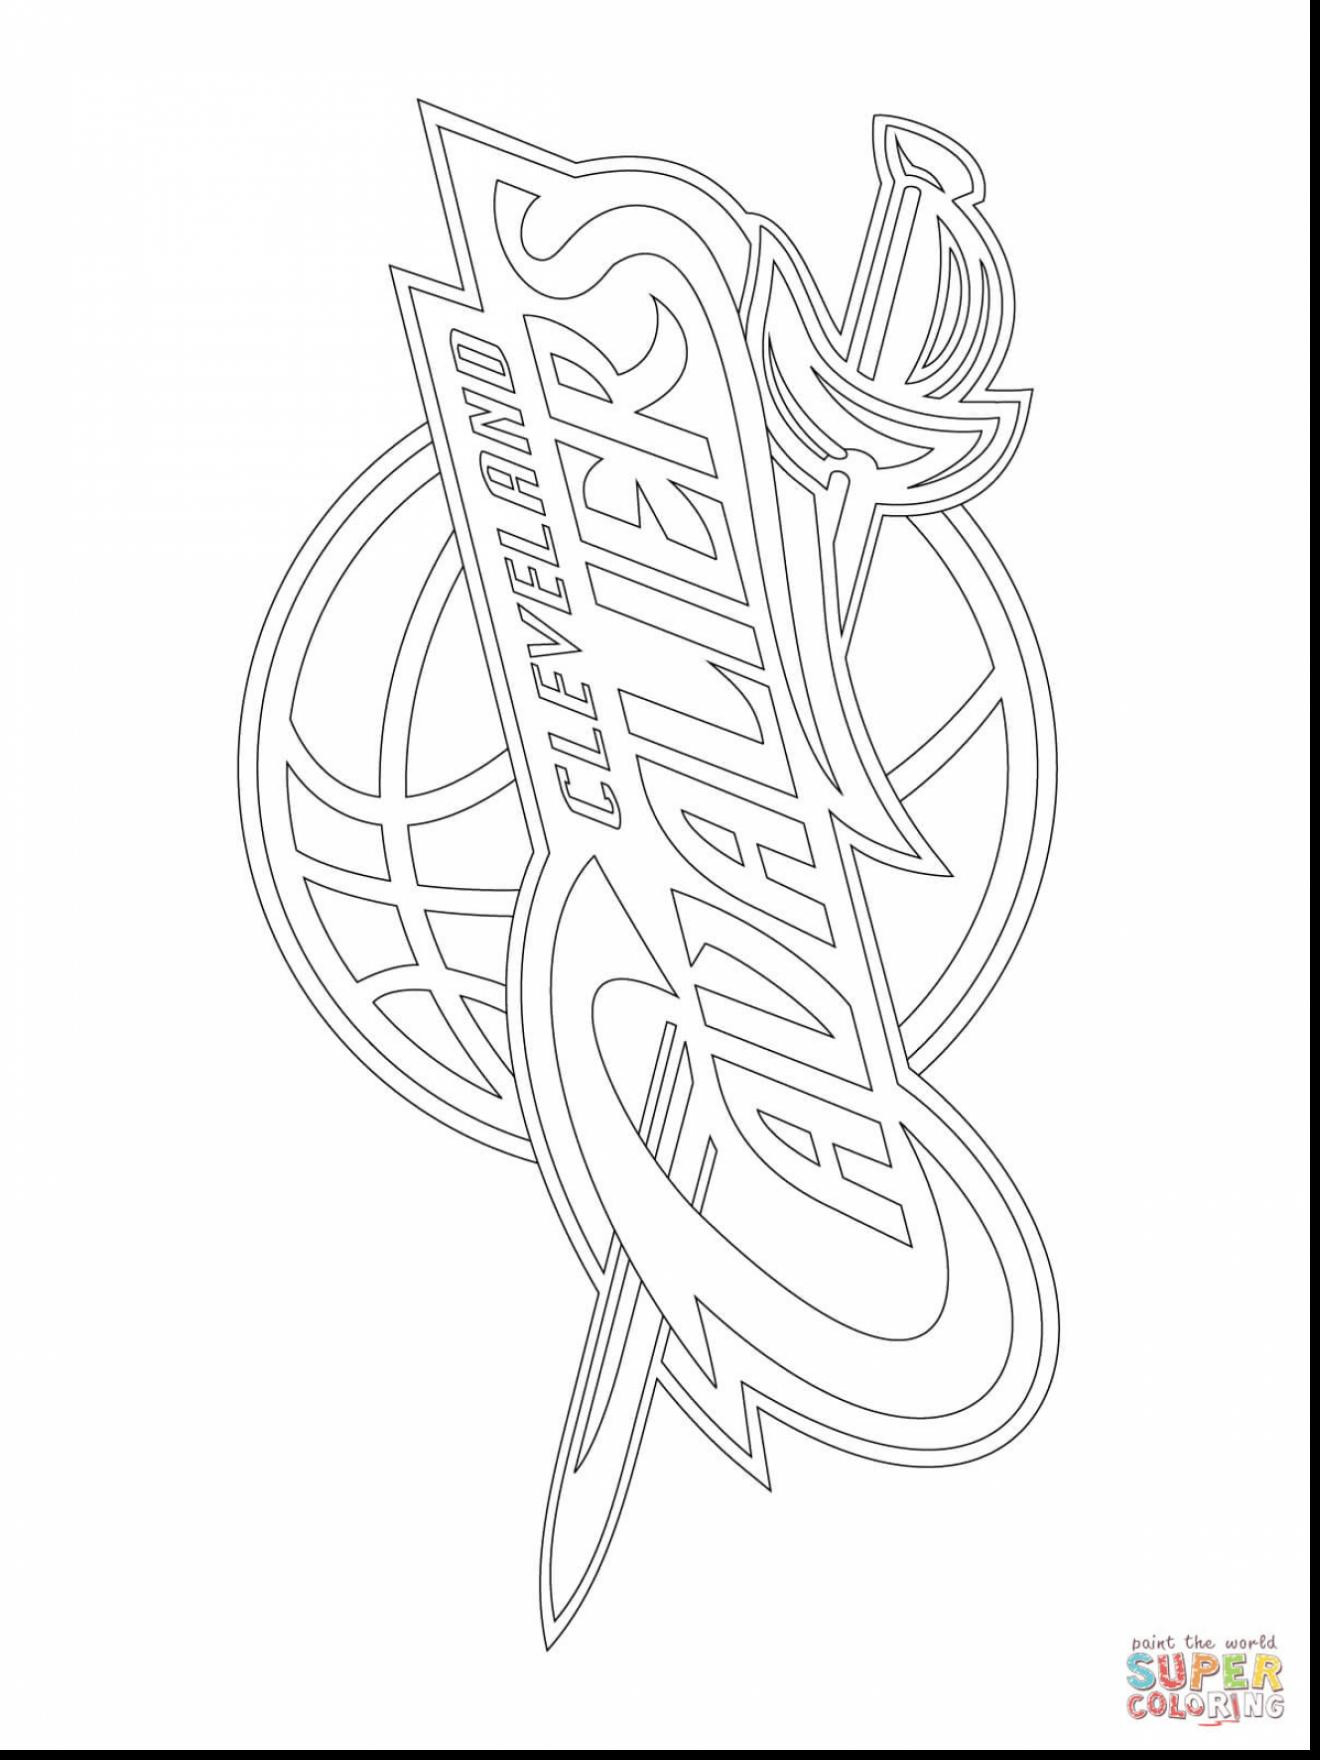 Skyline Coloring Pages Chicago Bulls Coloring Pages Awesome Cleveland Skyline Drawing At